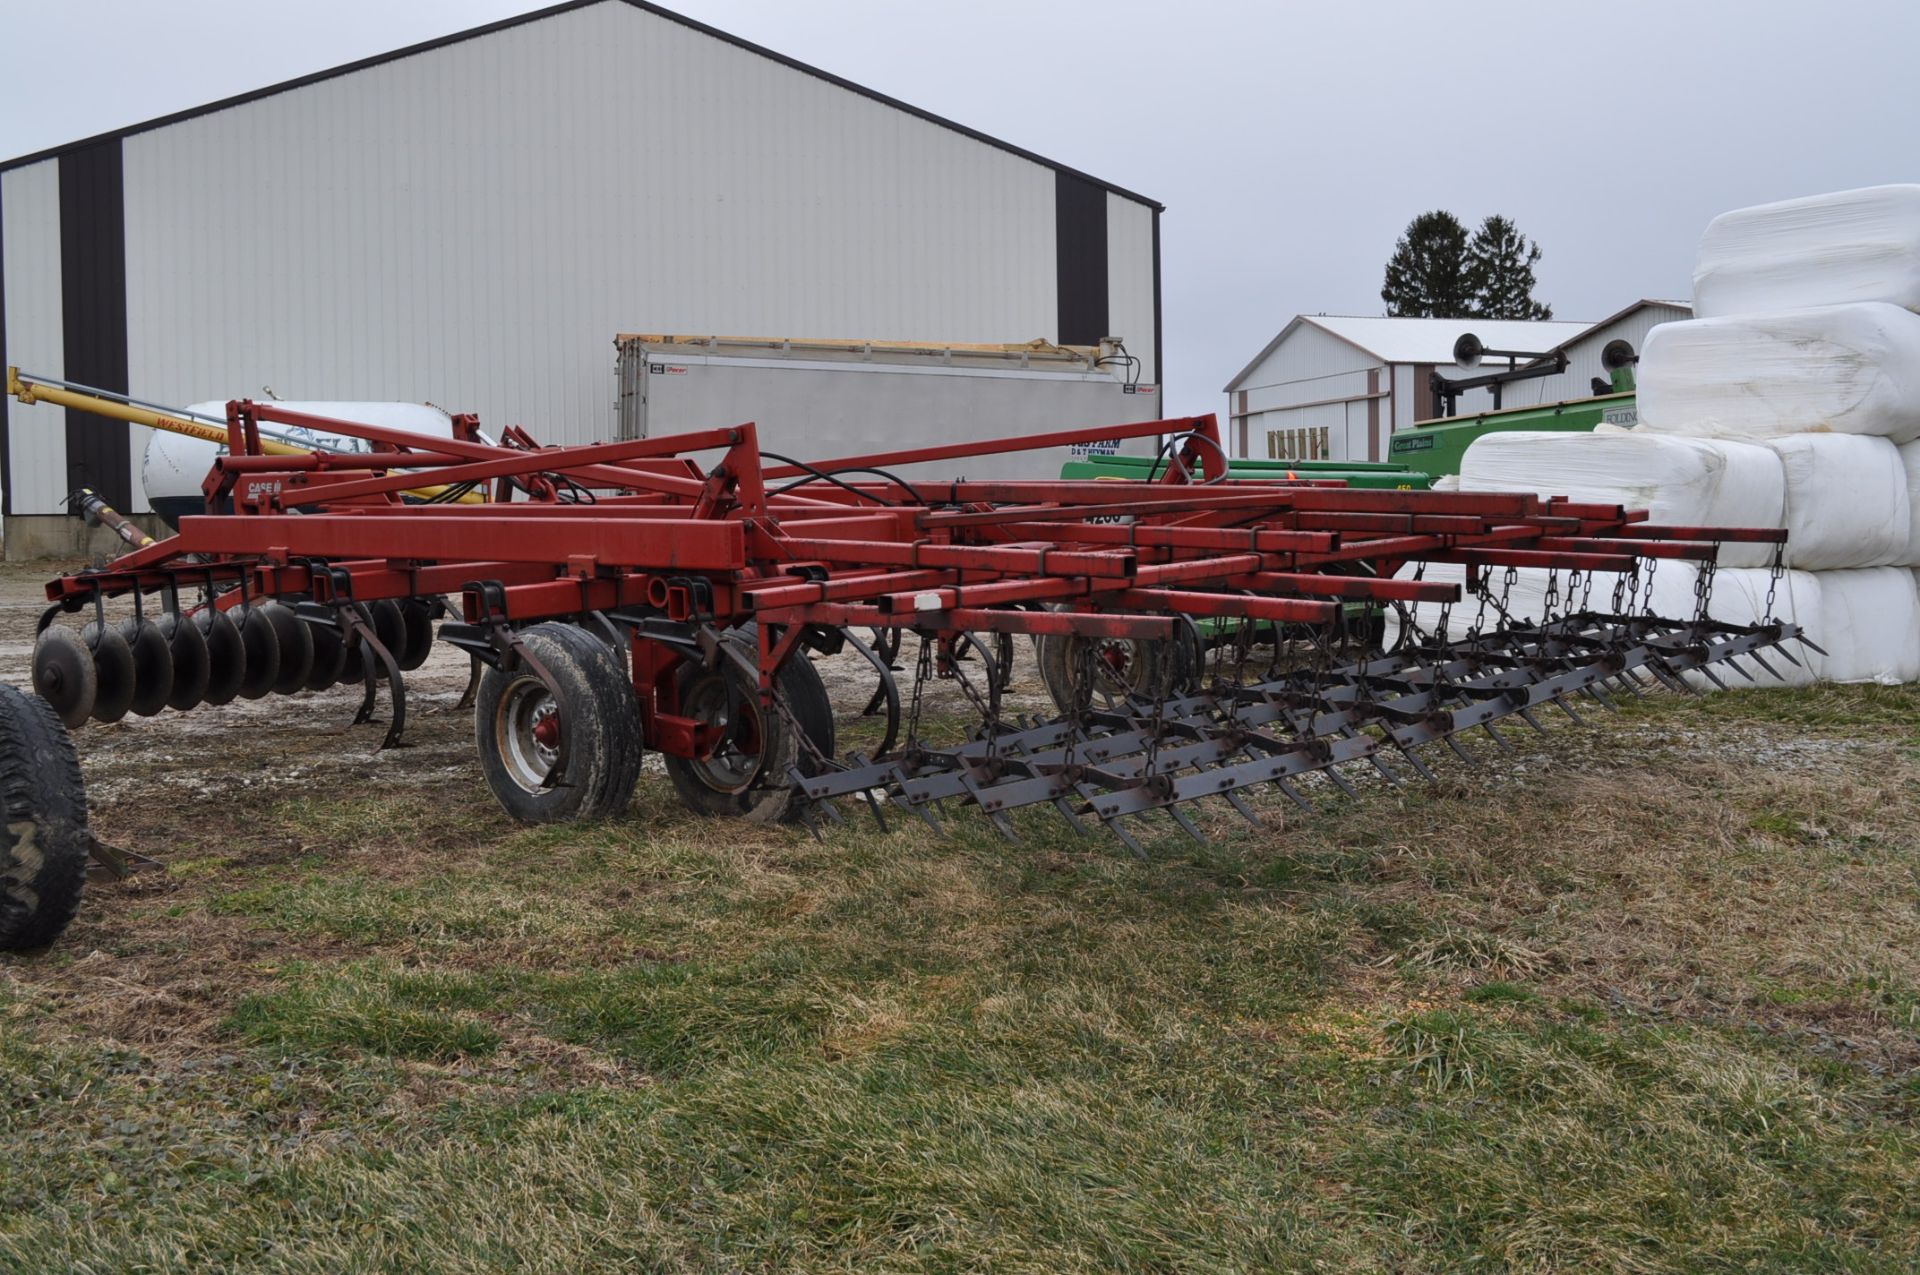 15’ Case IH 4200 mulch finisher, front disc, 5 bar harrow, rear hitch, SN JAG0690325 - Image 4 of 12